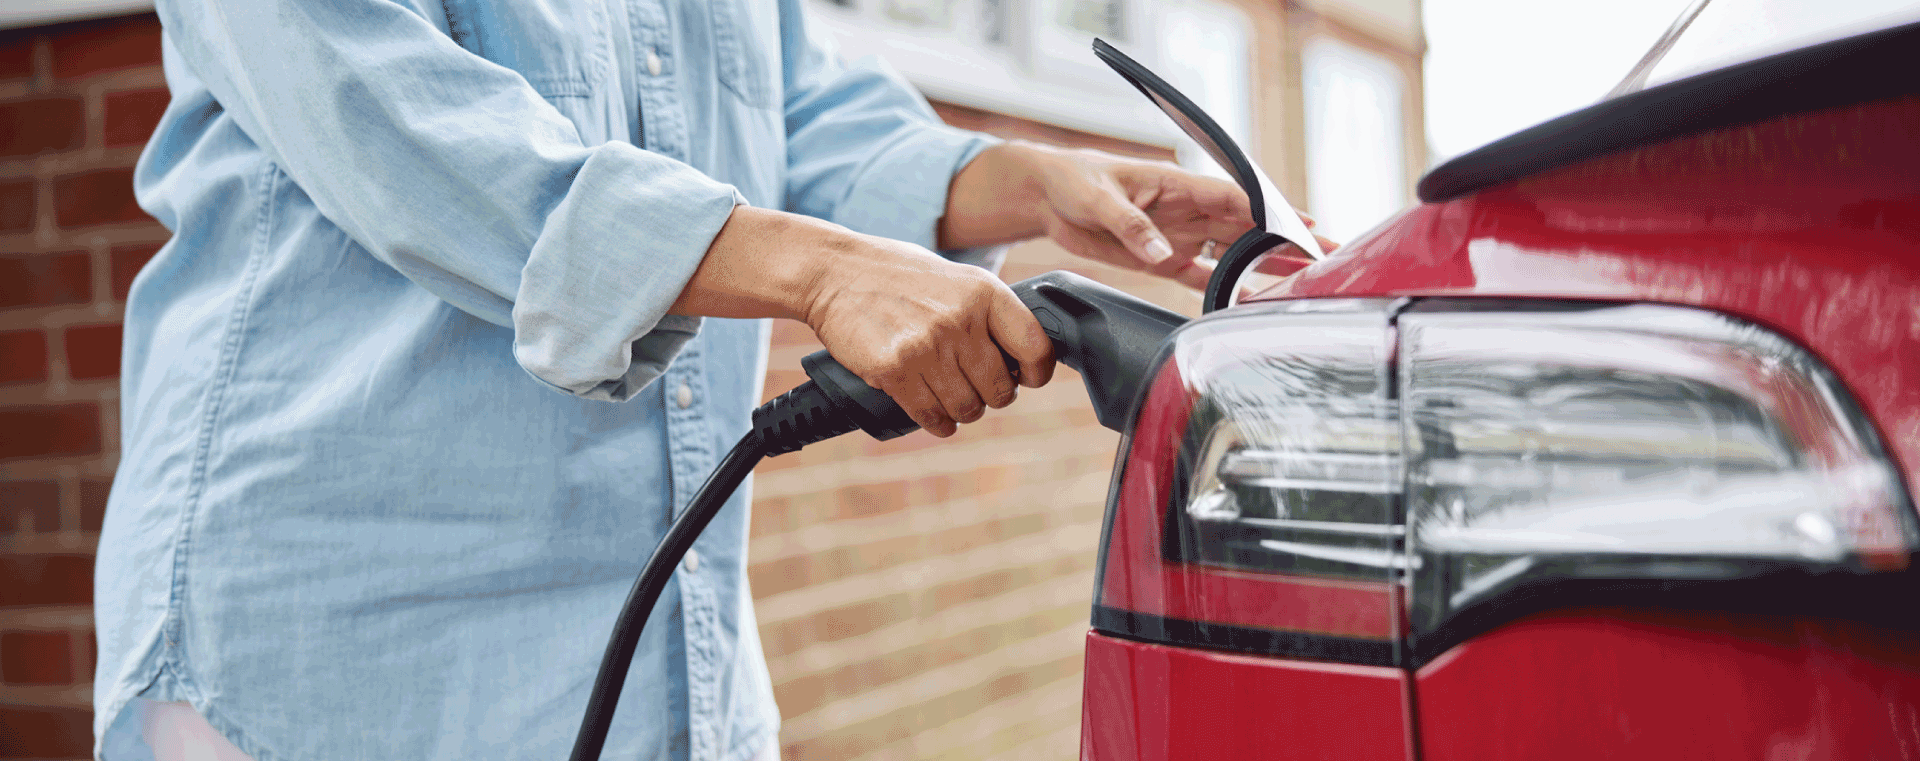 New $5,000 rebate announced to help deploy public electric vehicle charging